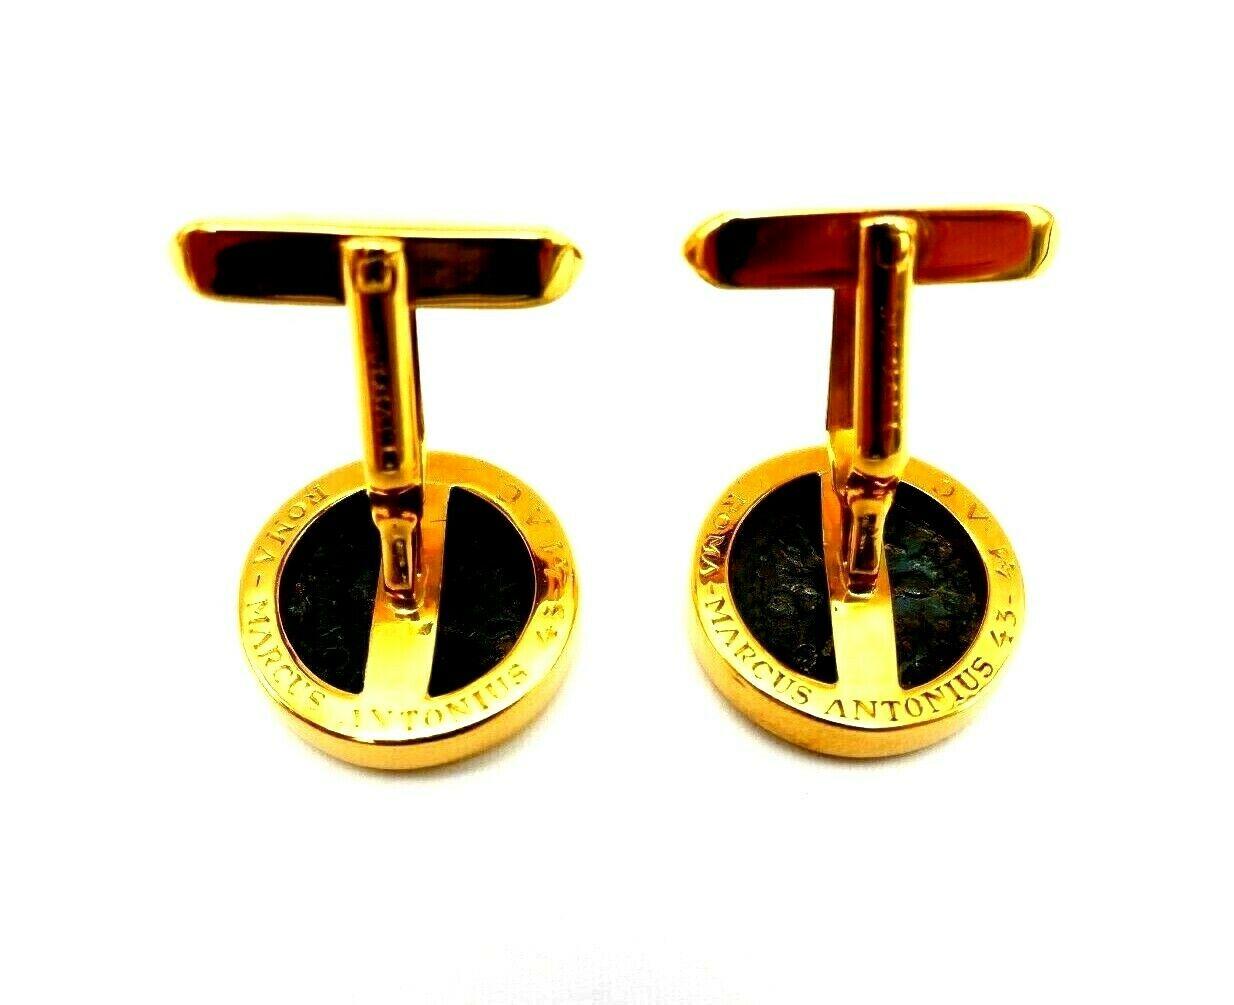 A pair of vintage cufflinks by Bulgari made of 18k yellow gold featuring ancient Roman coin. Stamped with 